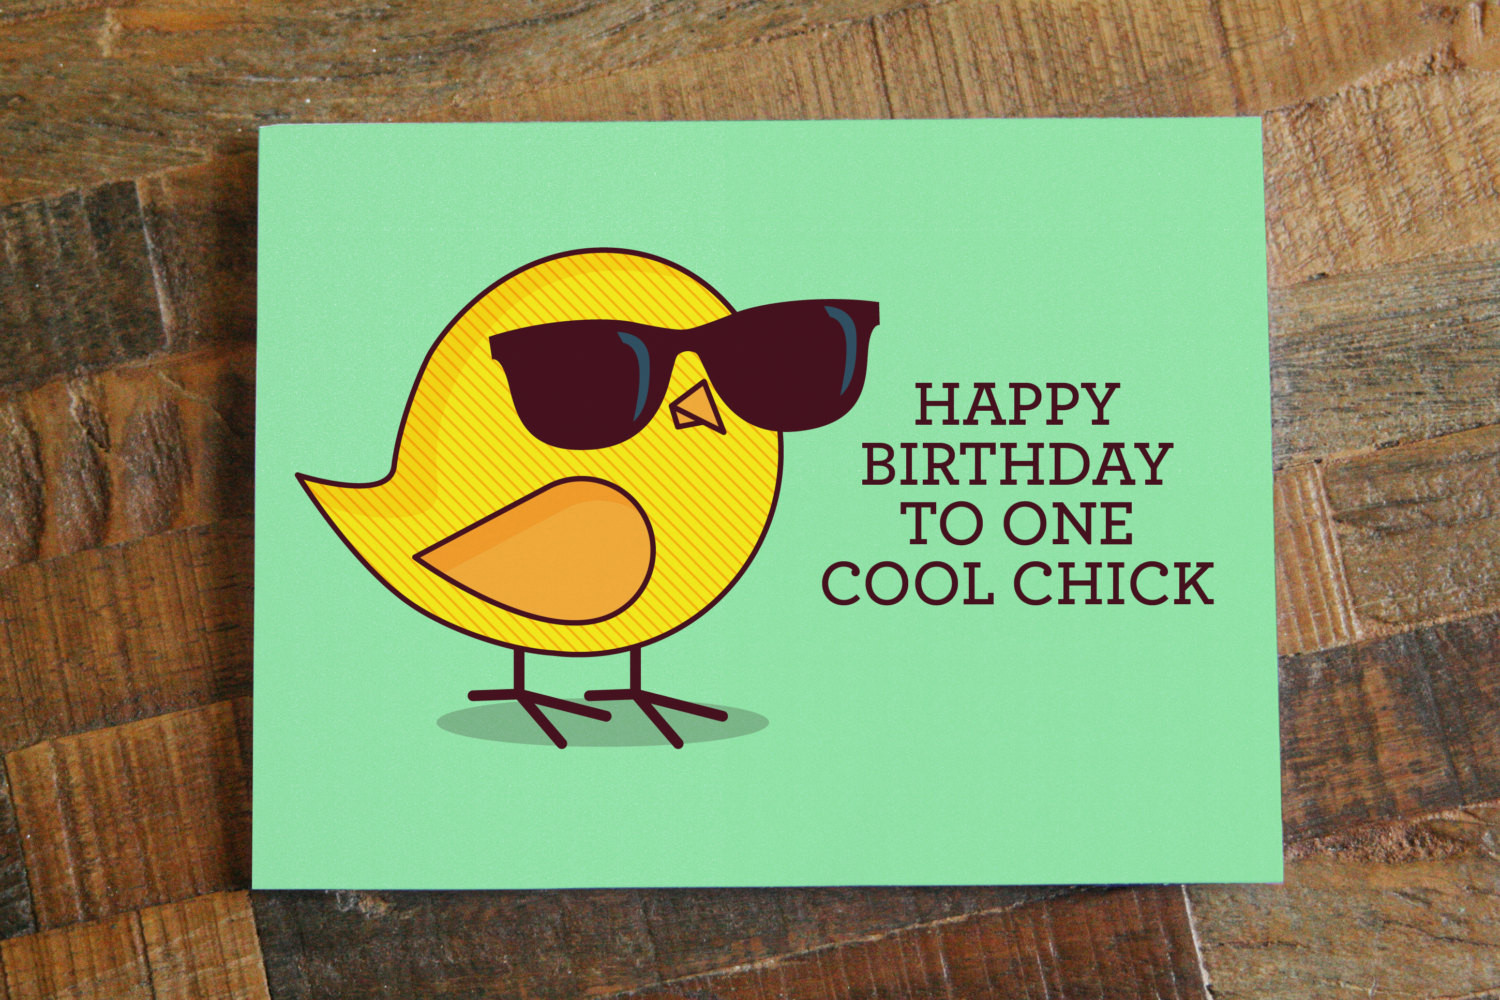 Birthday Cards Funny For Her
 Funny Birthday Card For Her "Happy Birthday to e Cool